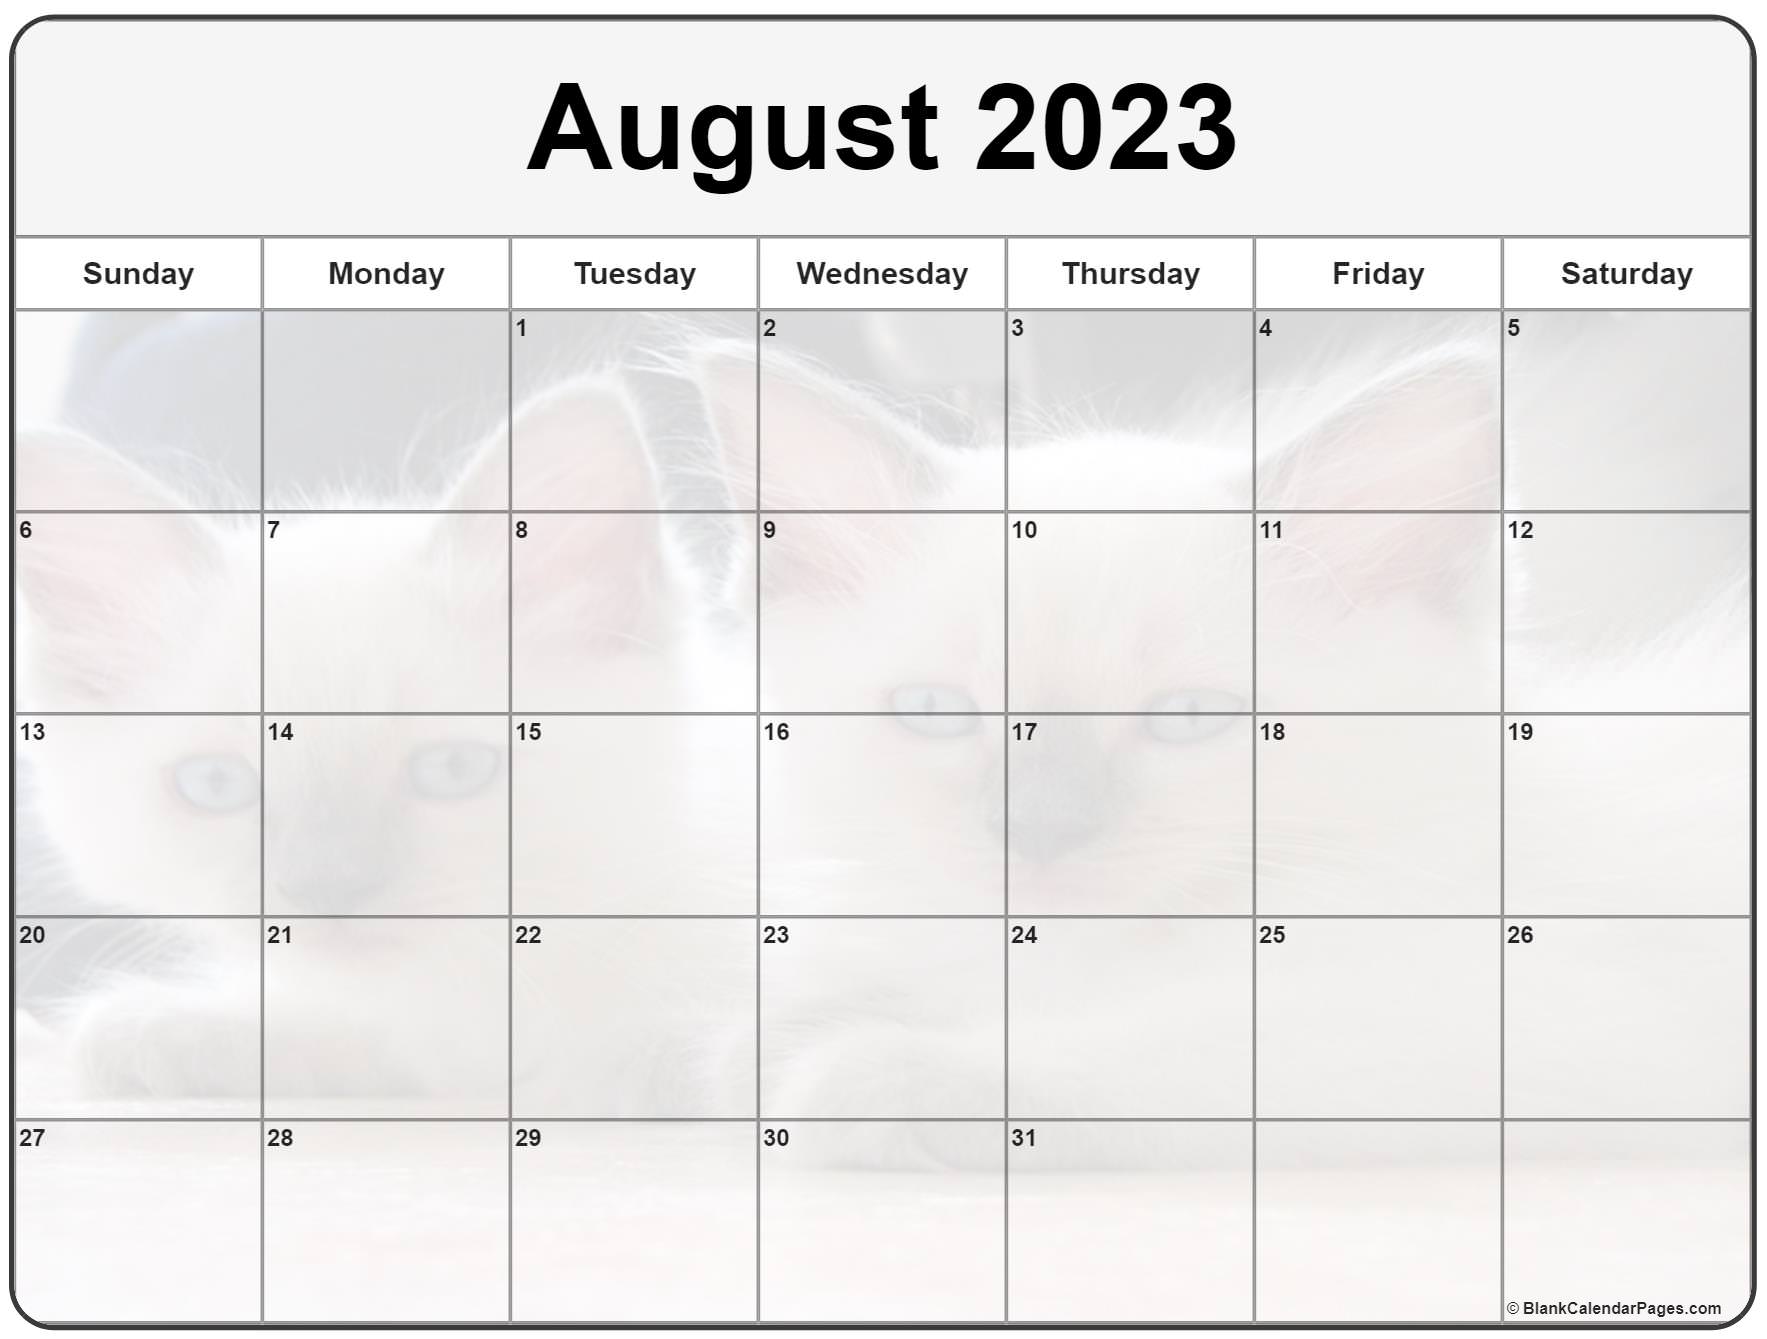 Collection of August 2023 photo calendars with image filters.